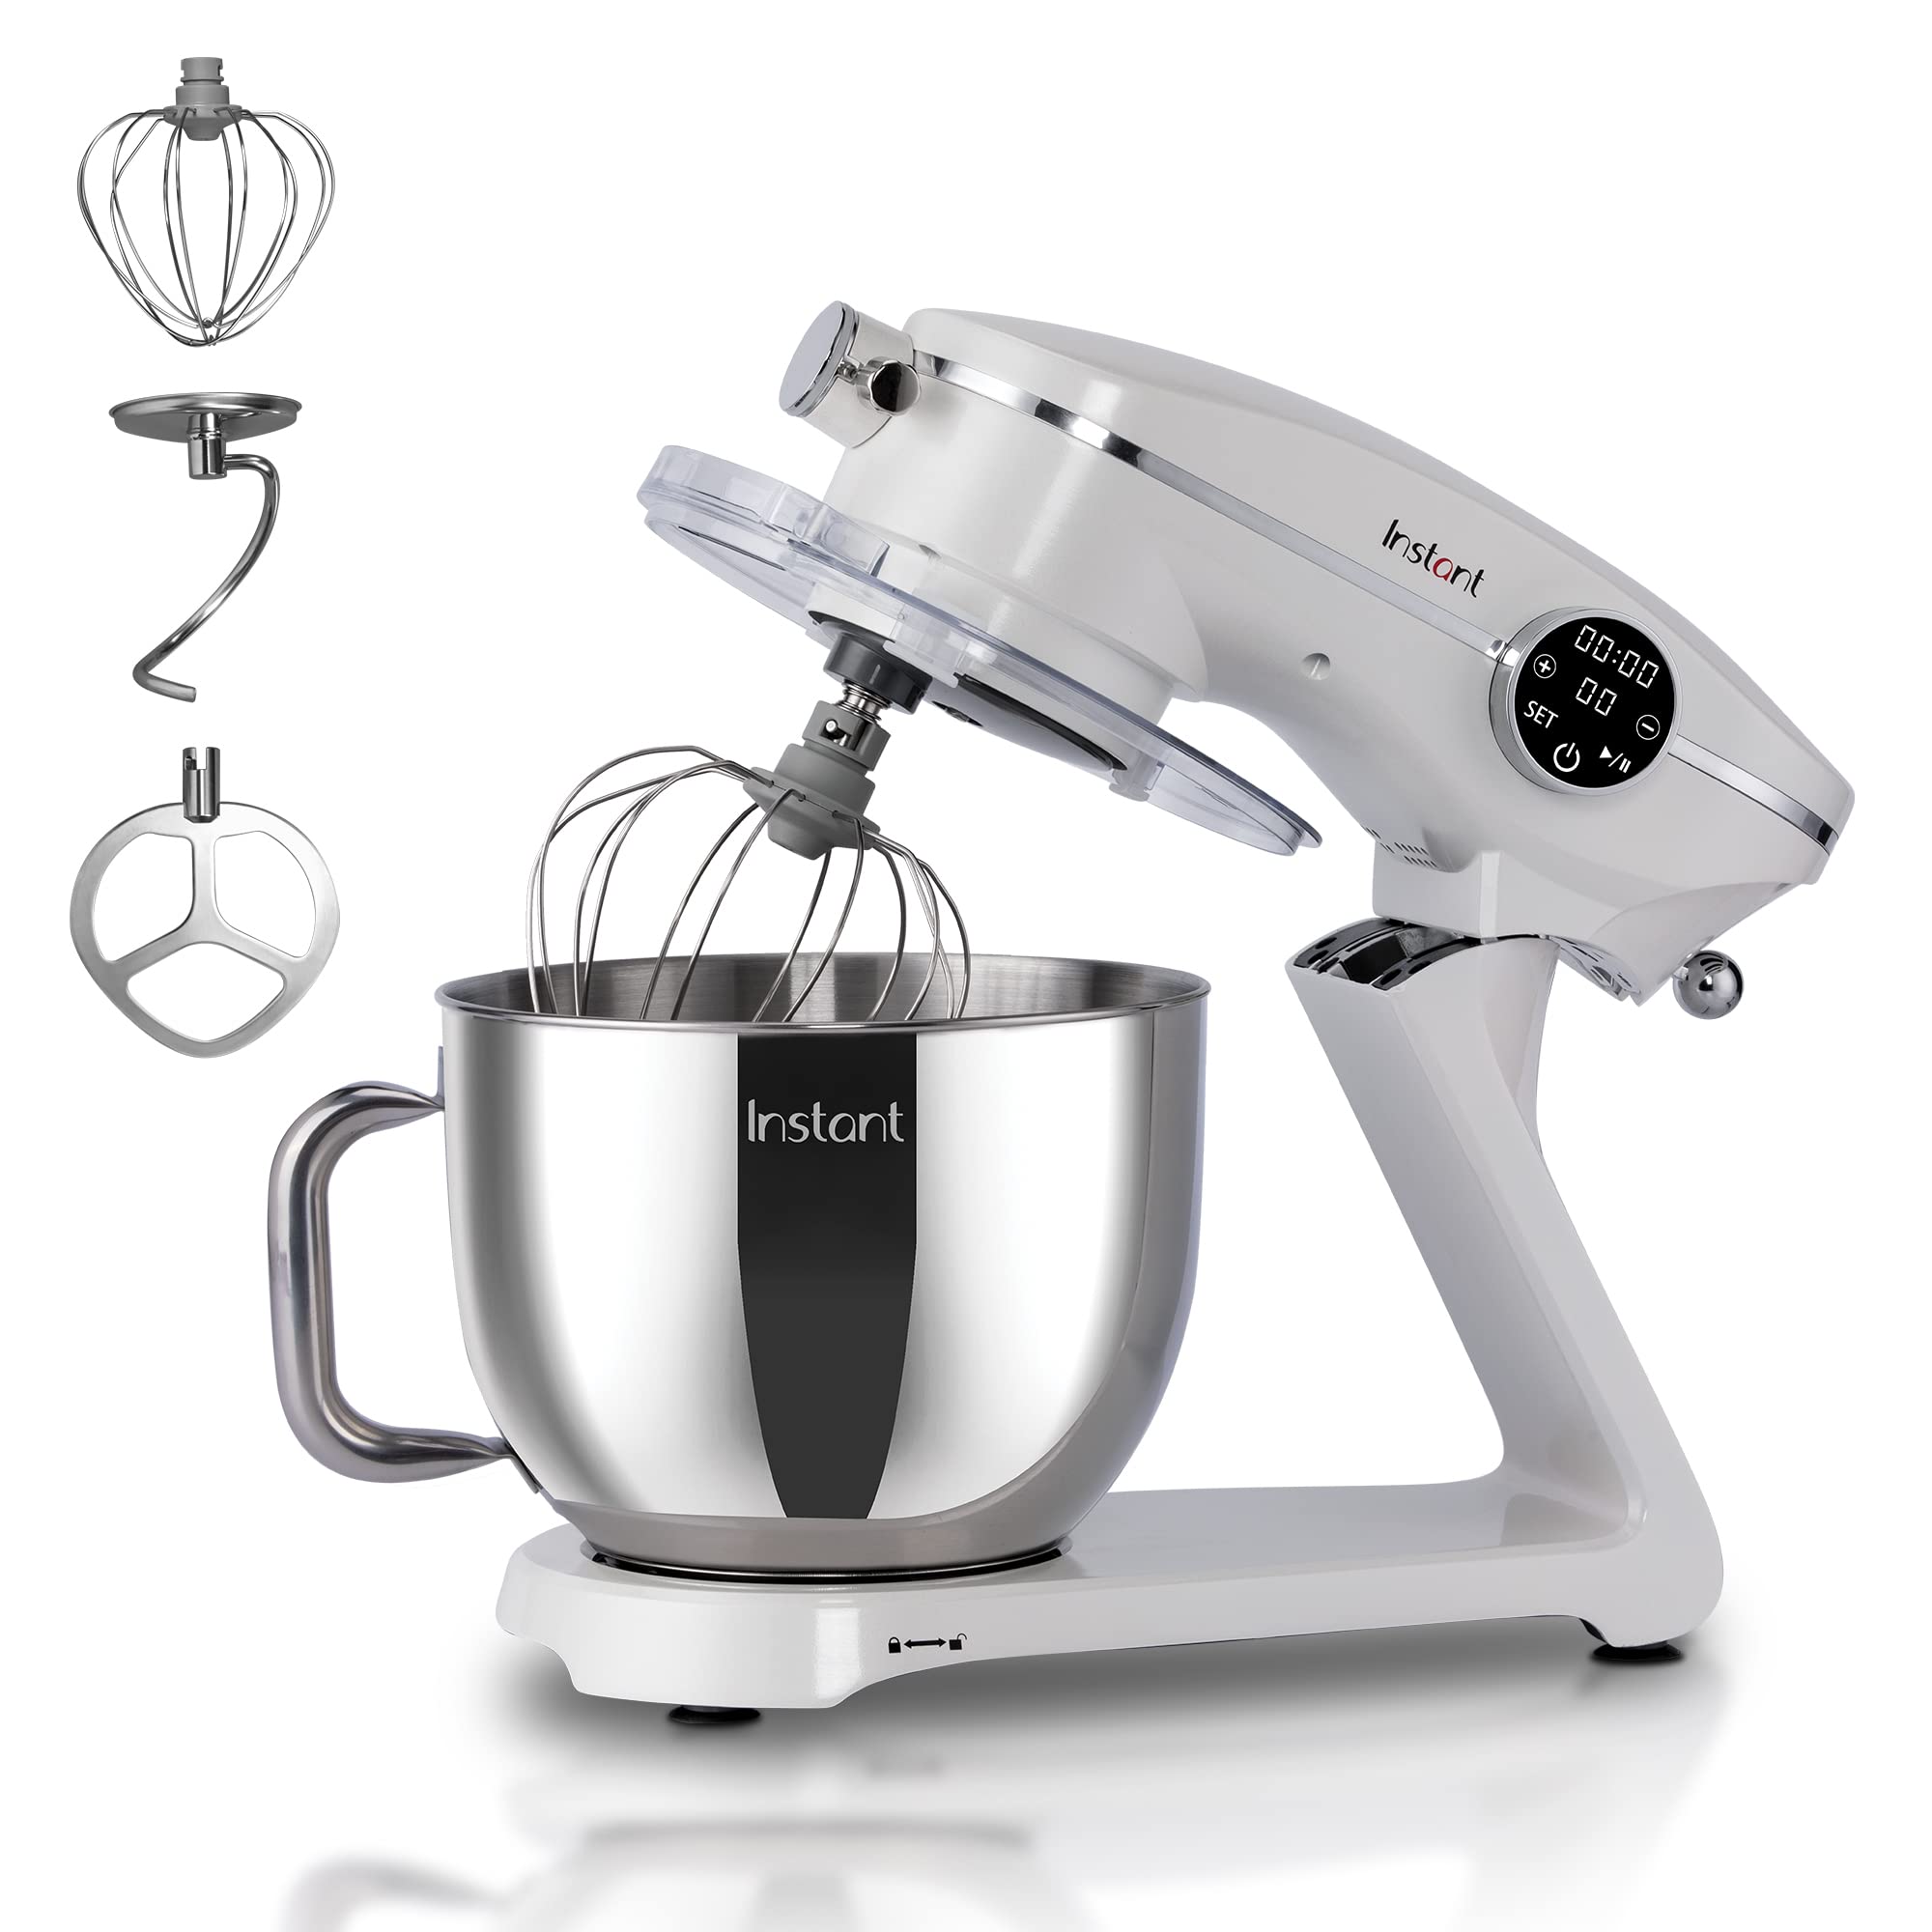 7.4-Quart Instant Pot 10-Speed Instant Stand Electric Mixer Pro w/ Digital Interface, Stainless Steel Bowl, Whisk, Dough Hook & Mixing Paddle (Pearl,600W) $188.75 + Free Shipping